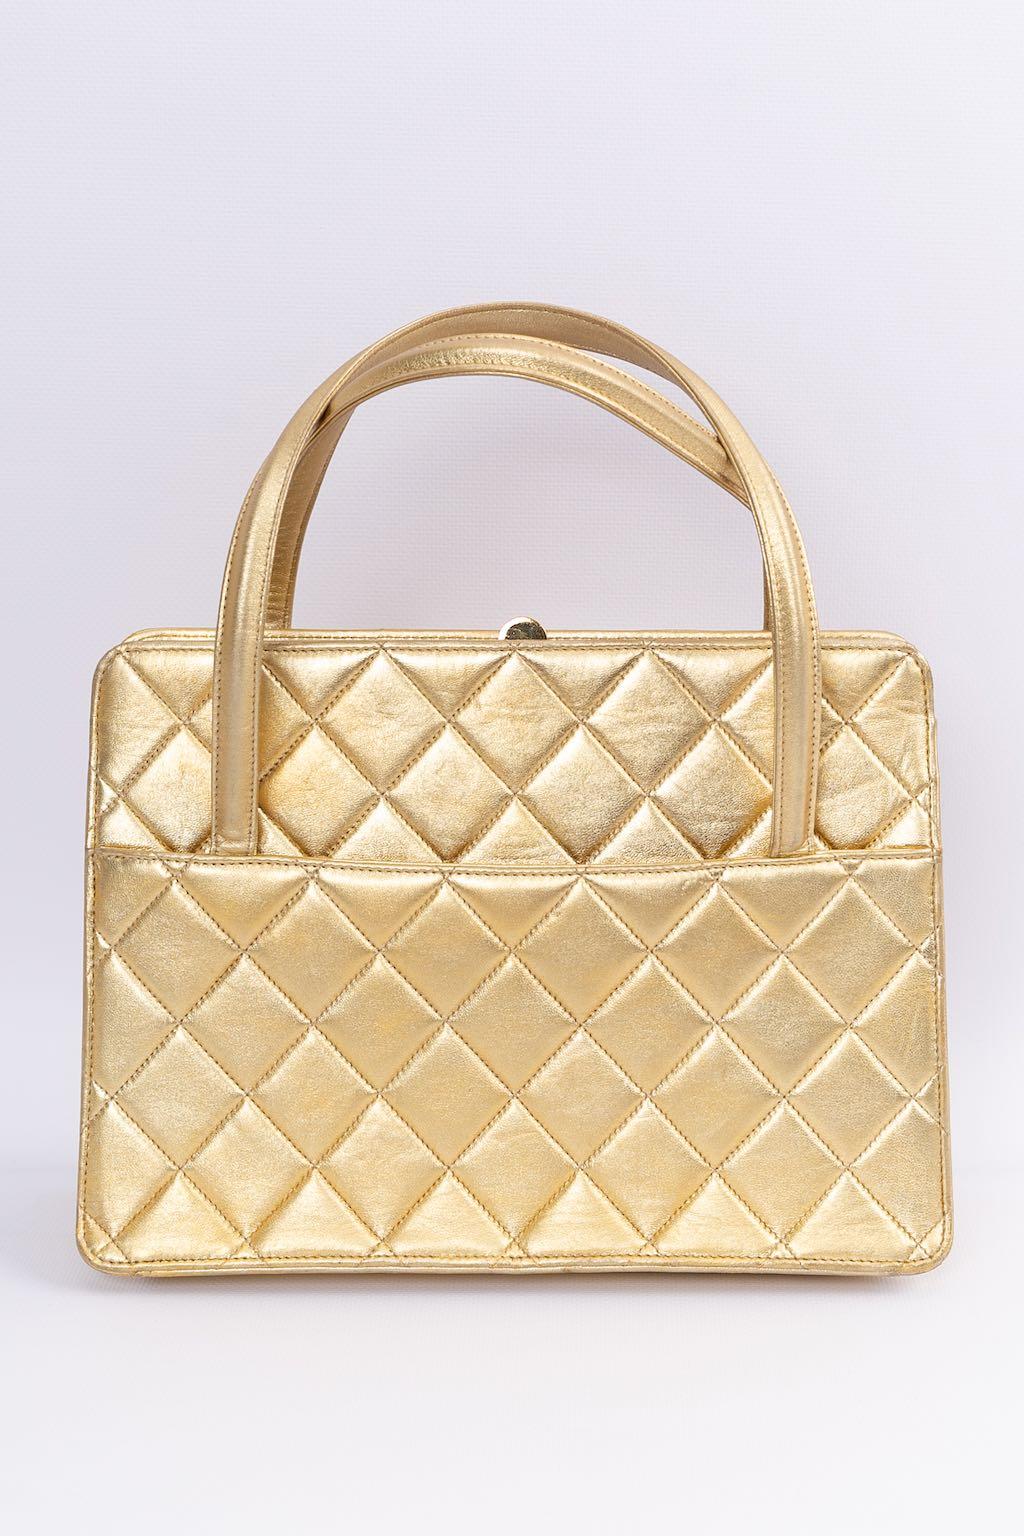 Women's Chanel Evening Bag in Gold Leather For Sale